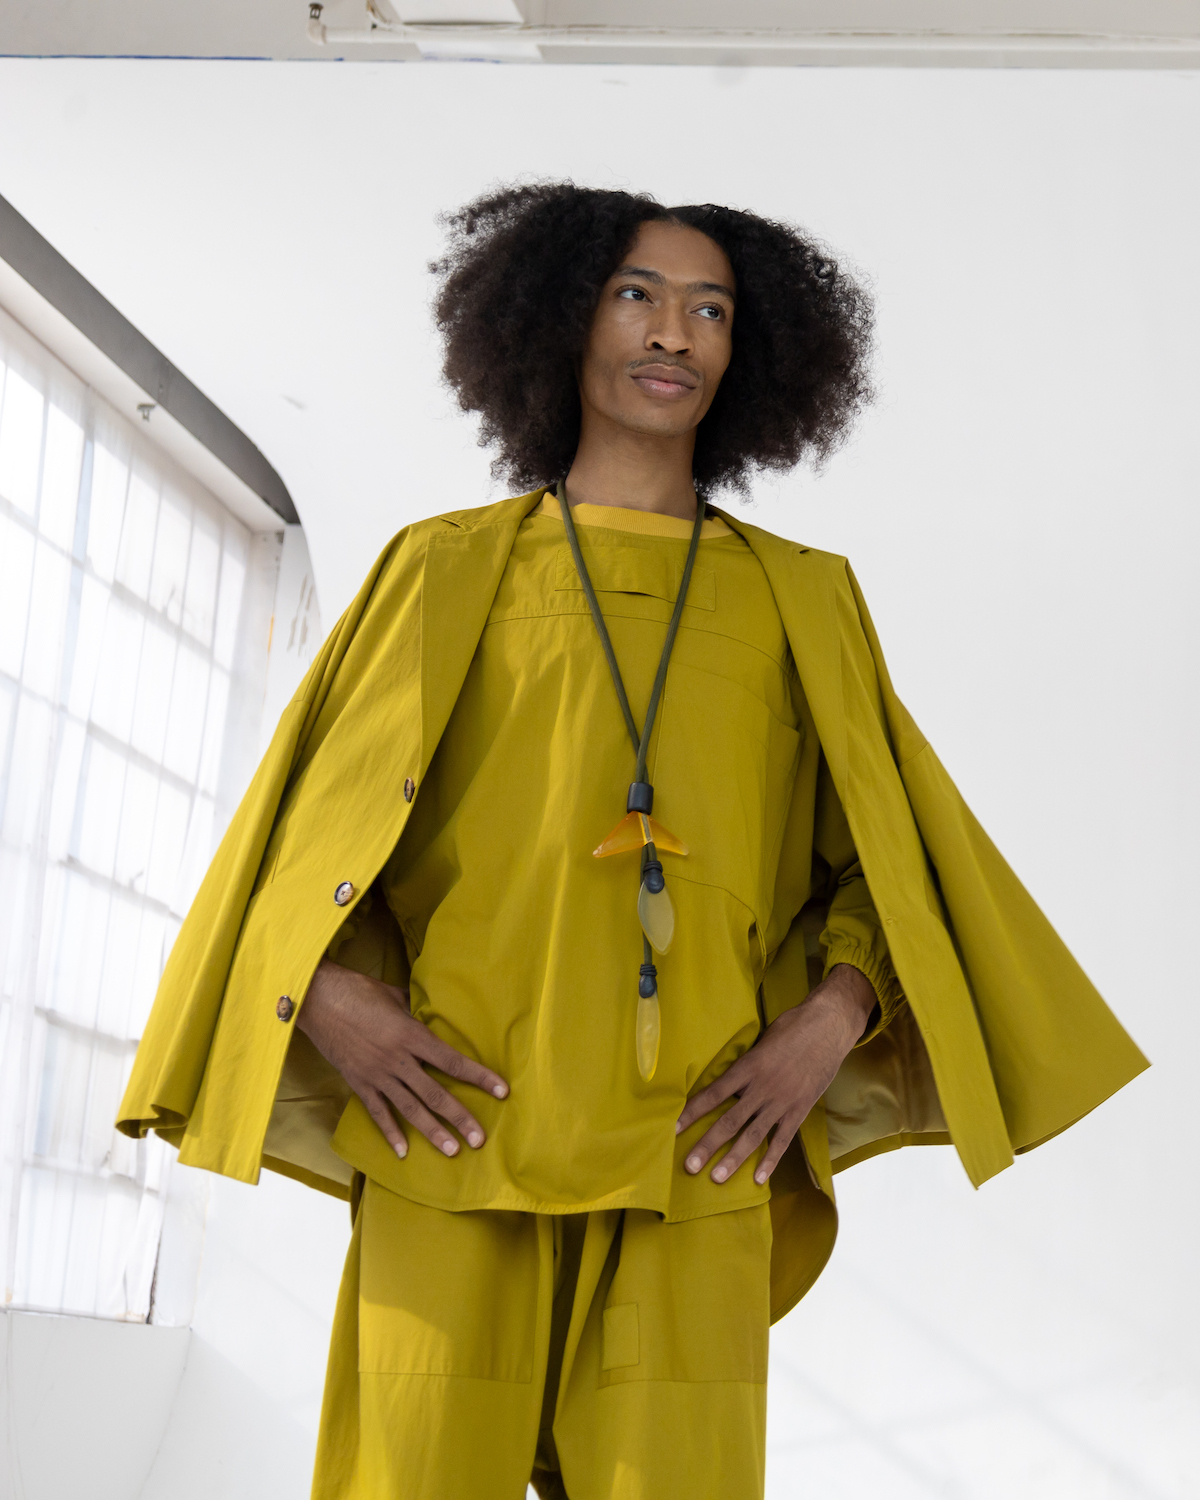 A model wearing a mustard outfit stands after walking down a short runway. The model is wearing clothes from A.POTTS.